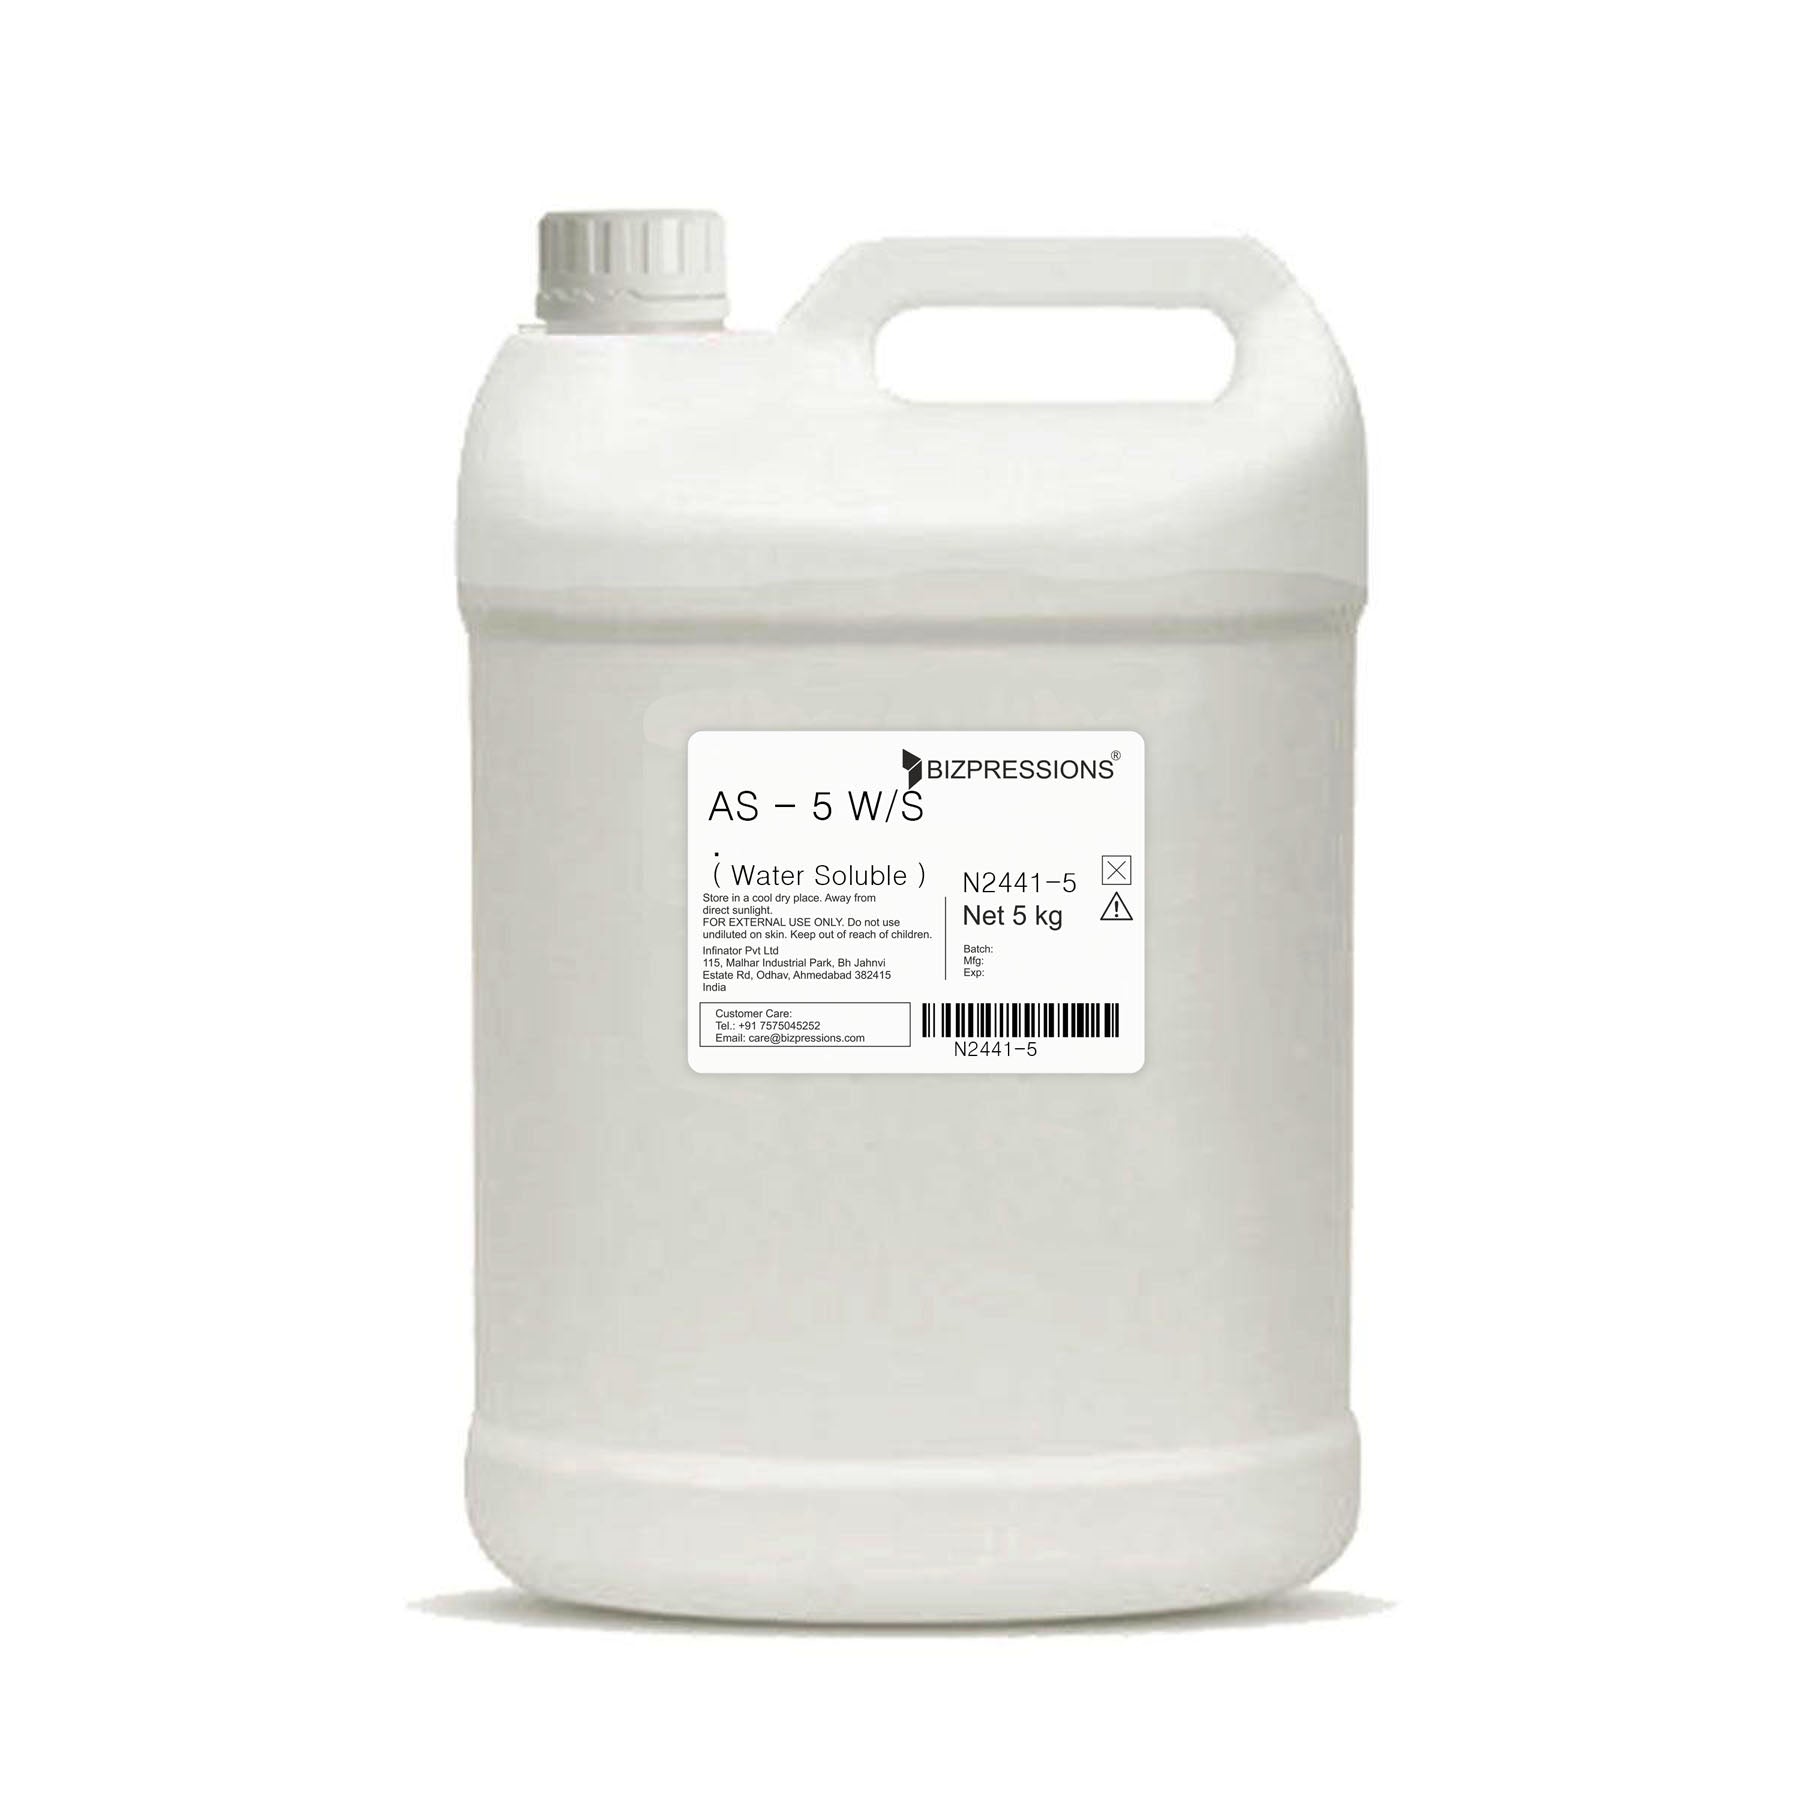 AS - 5 W/S - Fragrance ( Water Soluble ) - 5 kg